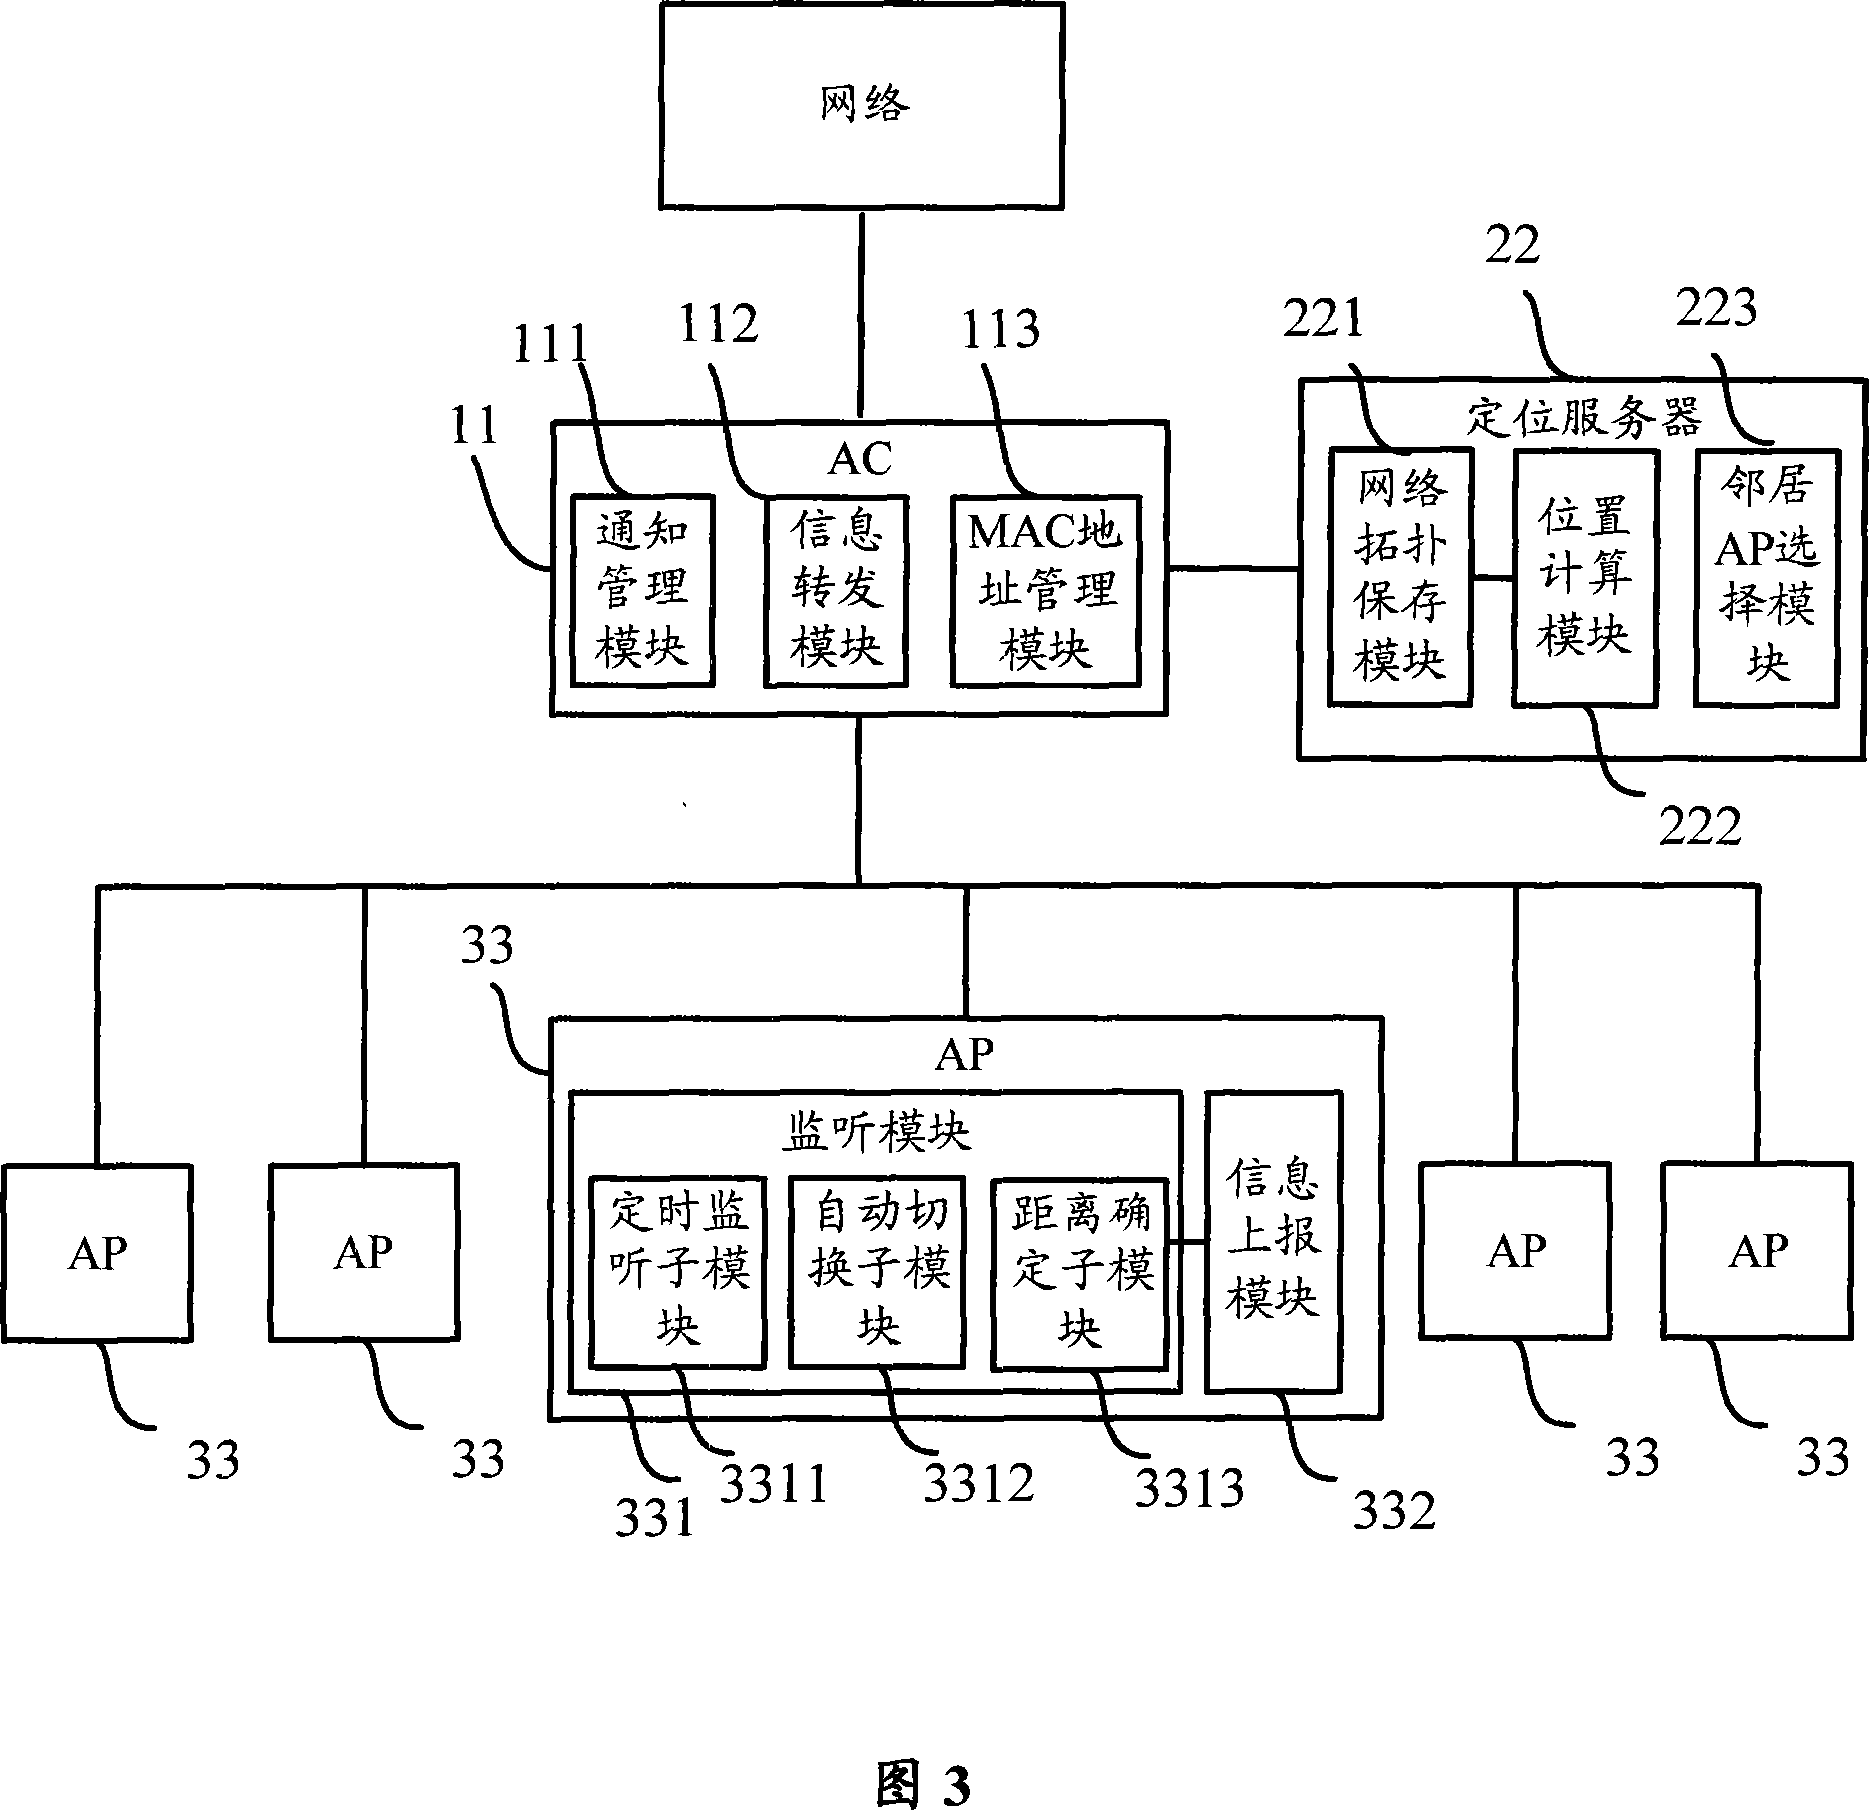 Wireless terminal locating method, system and device